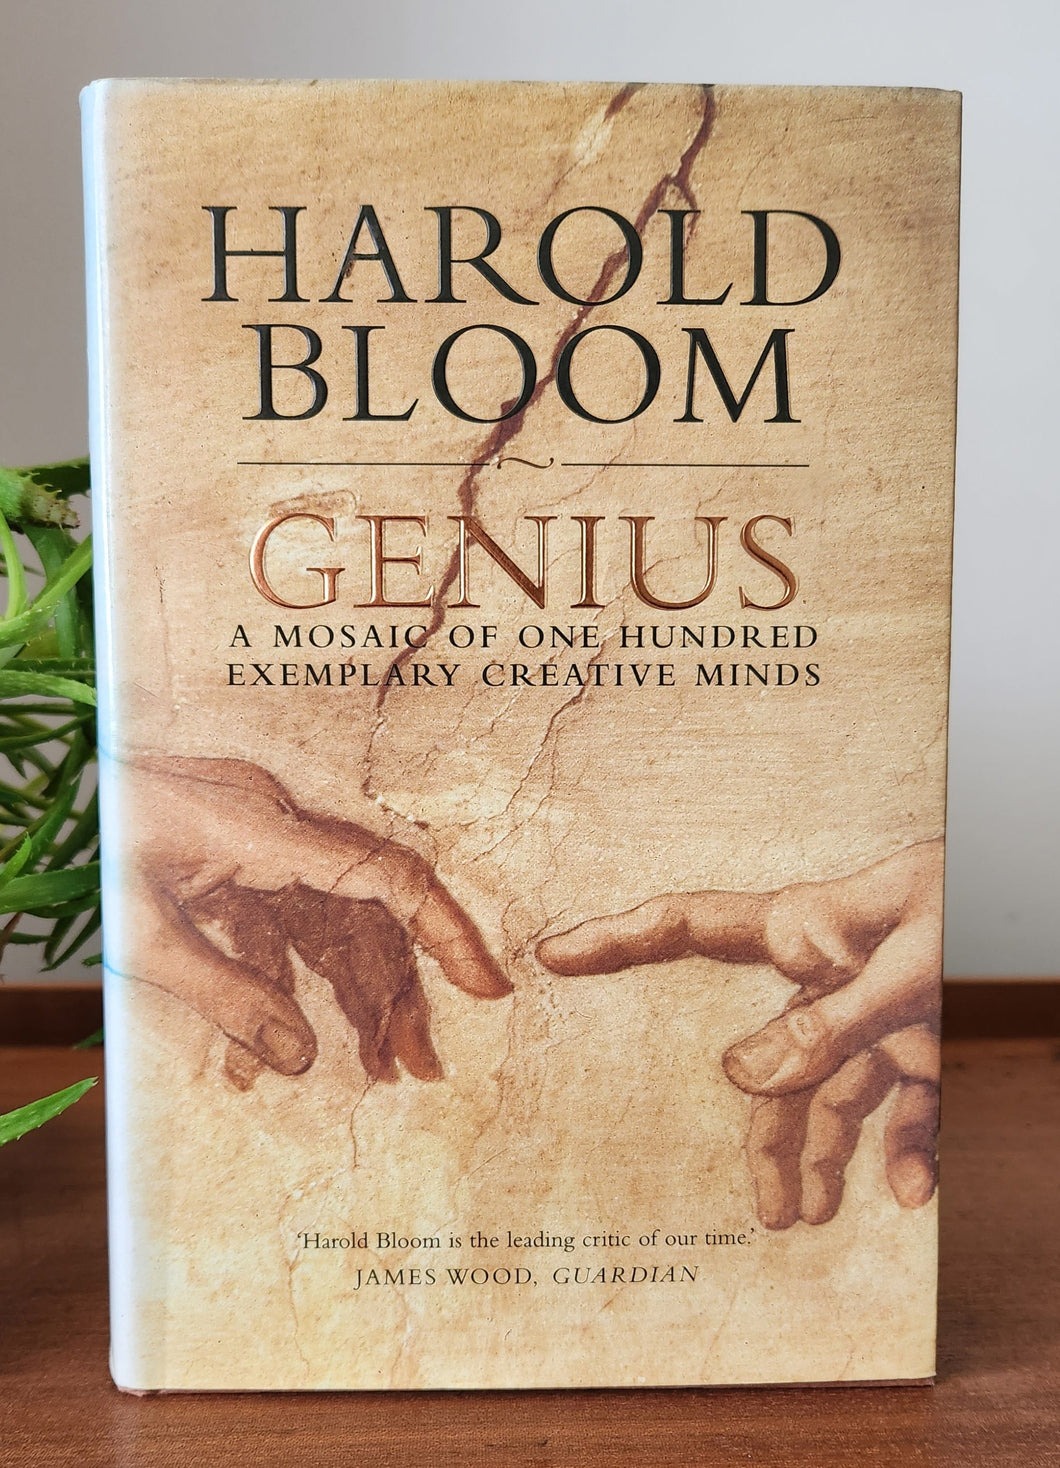 Genius: A Mosaic of One Hundred Exemplary Creative Minds by Harold Bloom